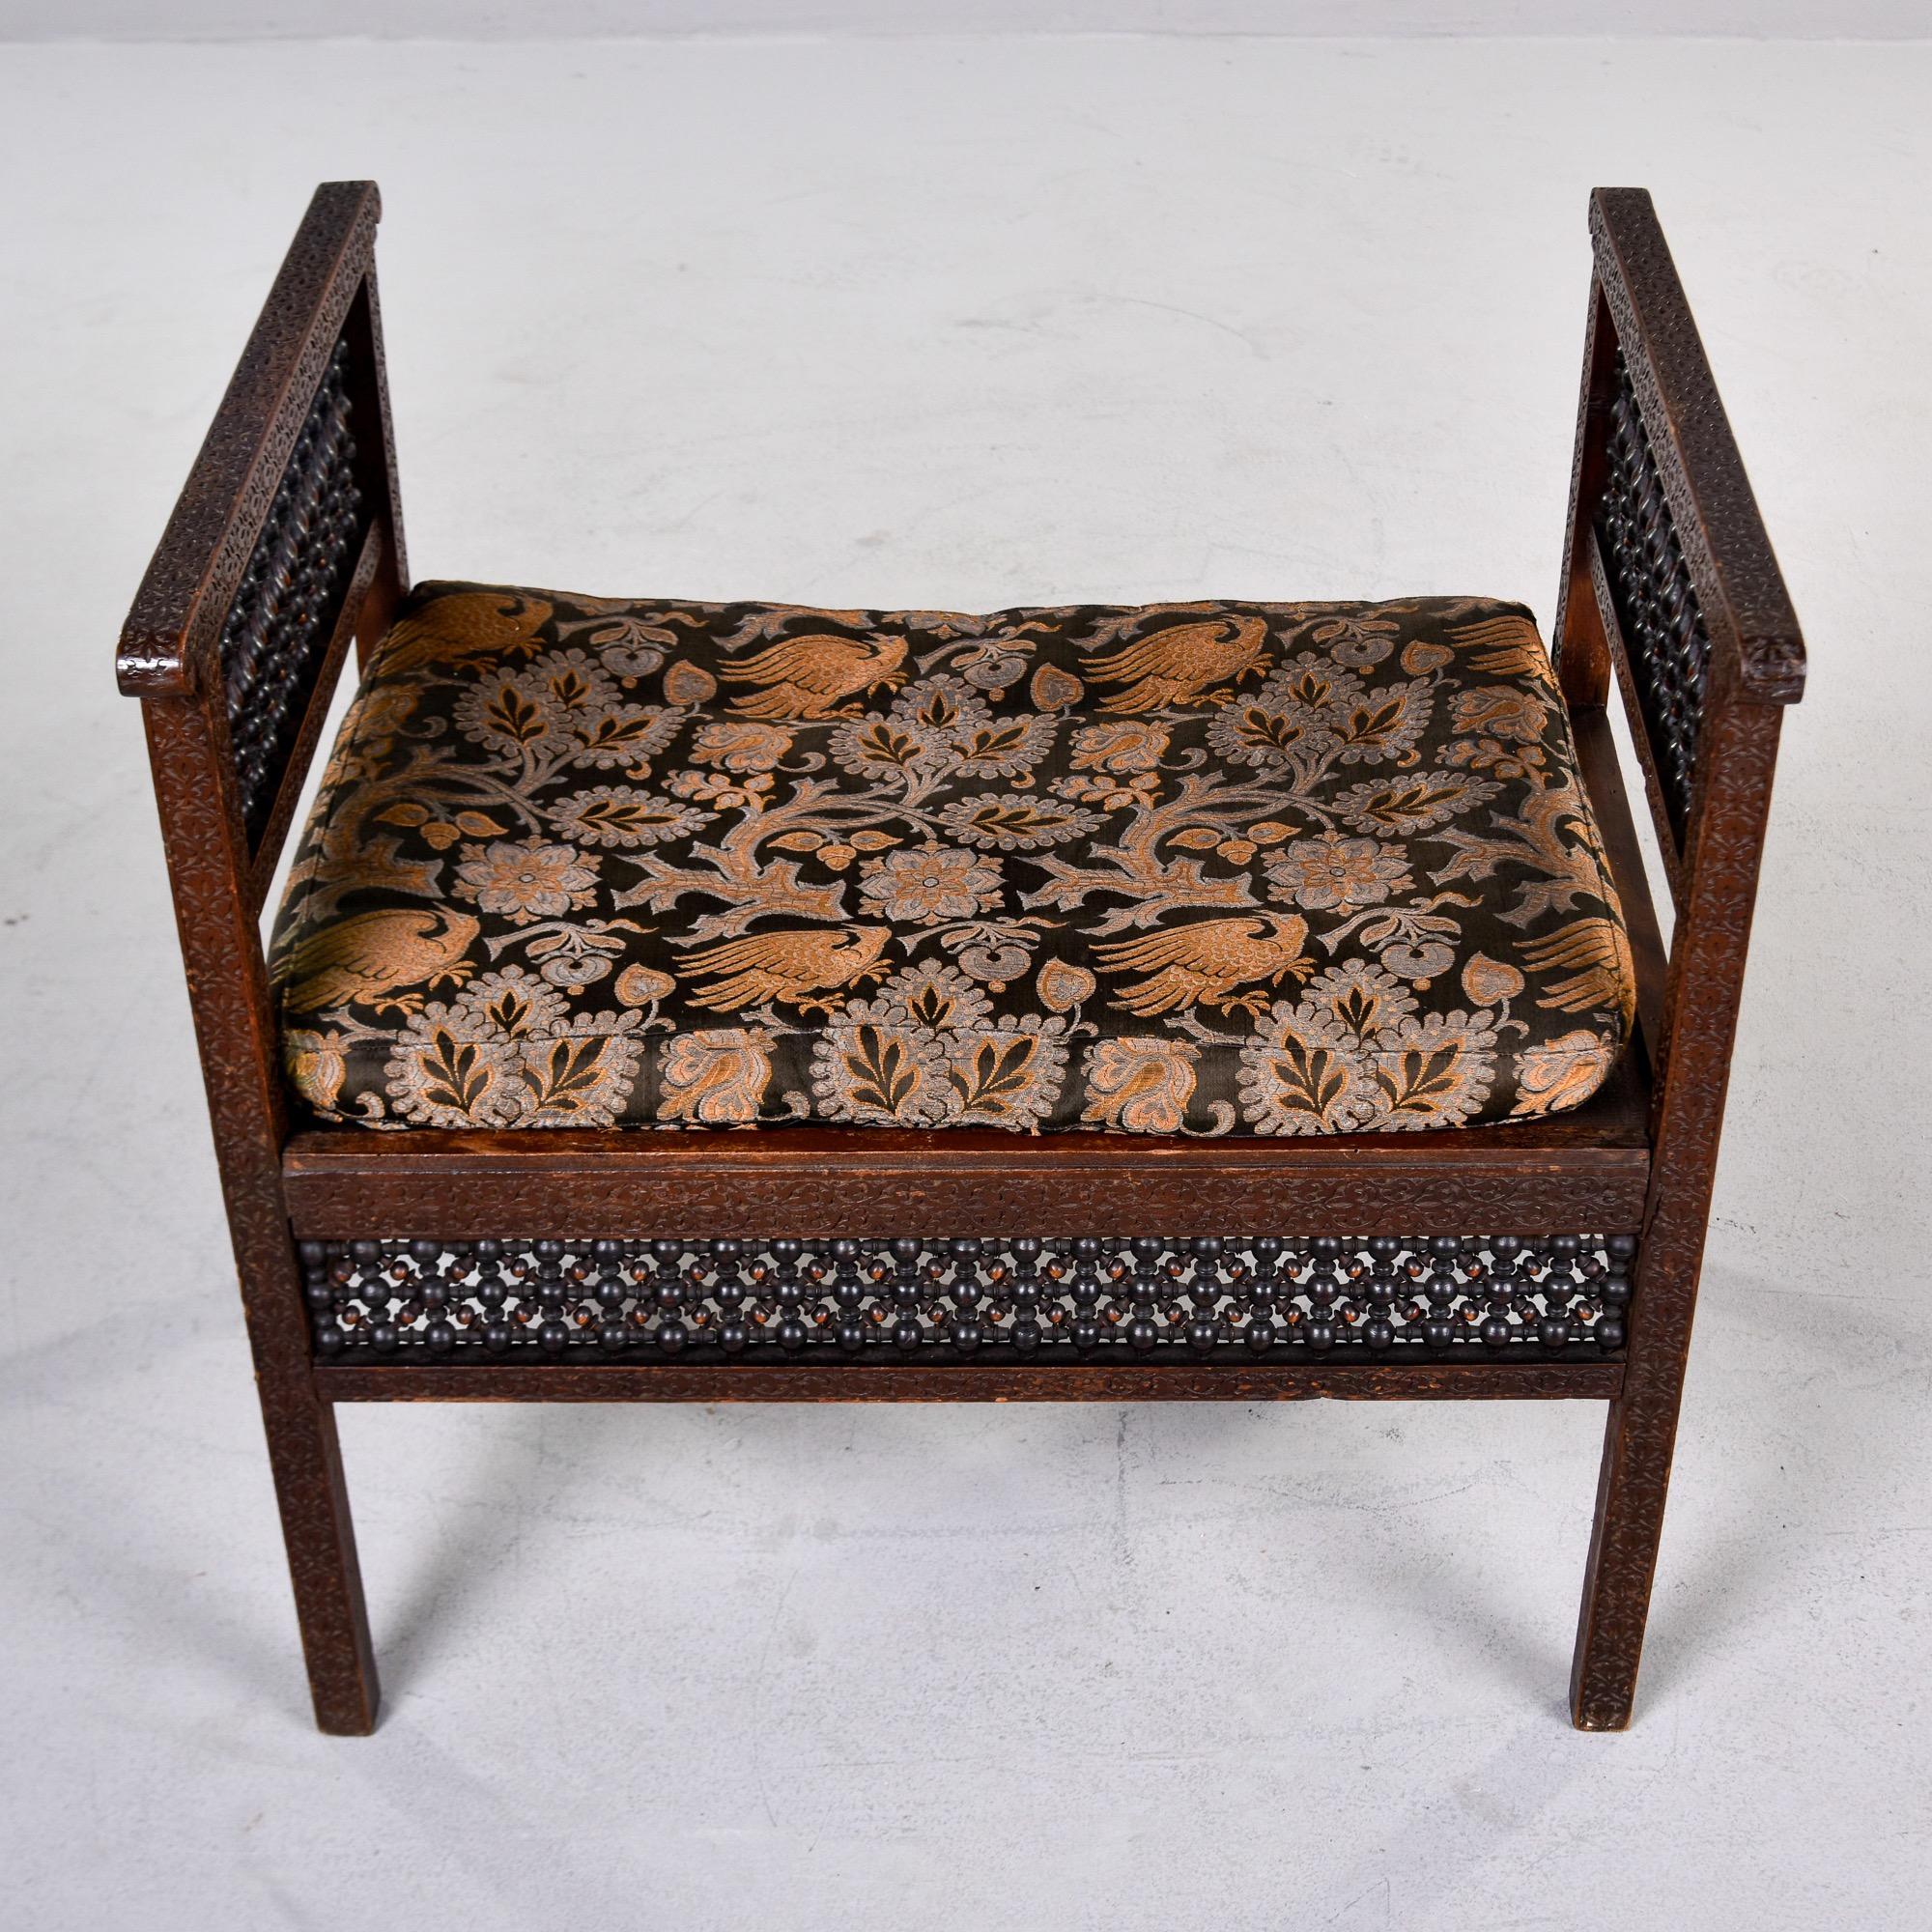 Hand-Carved Early 20th C Heavily Carved Teak Moorish Bench With Tall Sides and Cushion For Sale